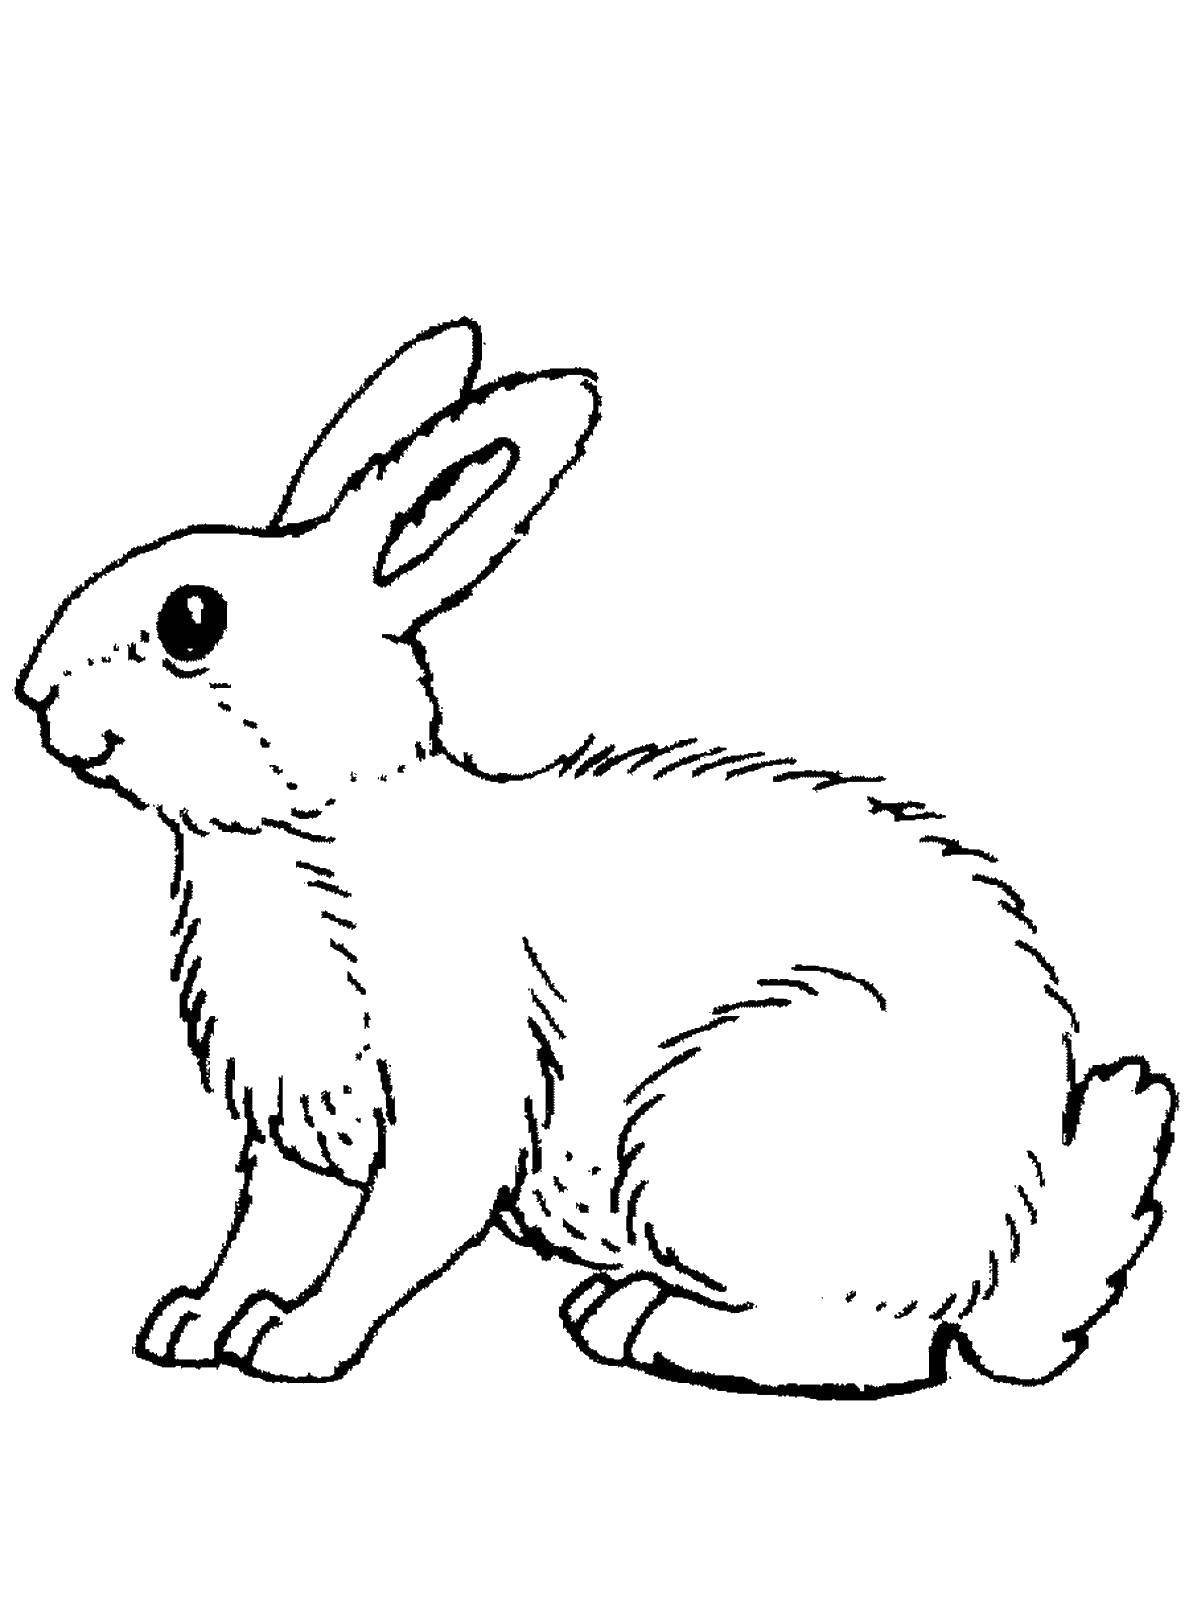 Coloring Rabbit. Category wild animals. Tags:  rabbit, hare.